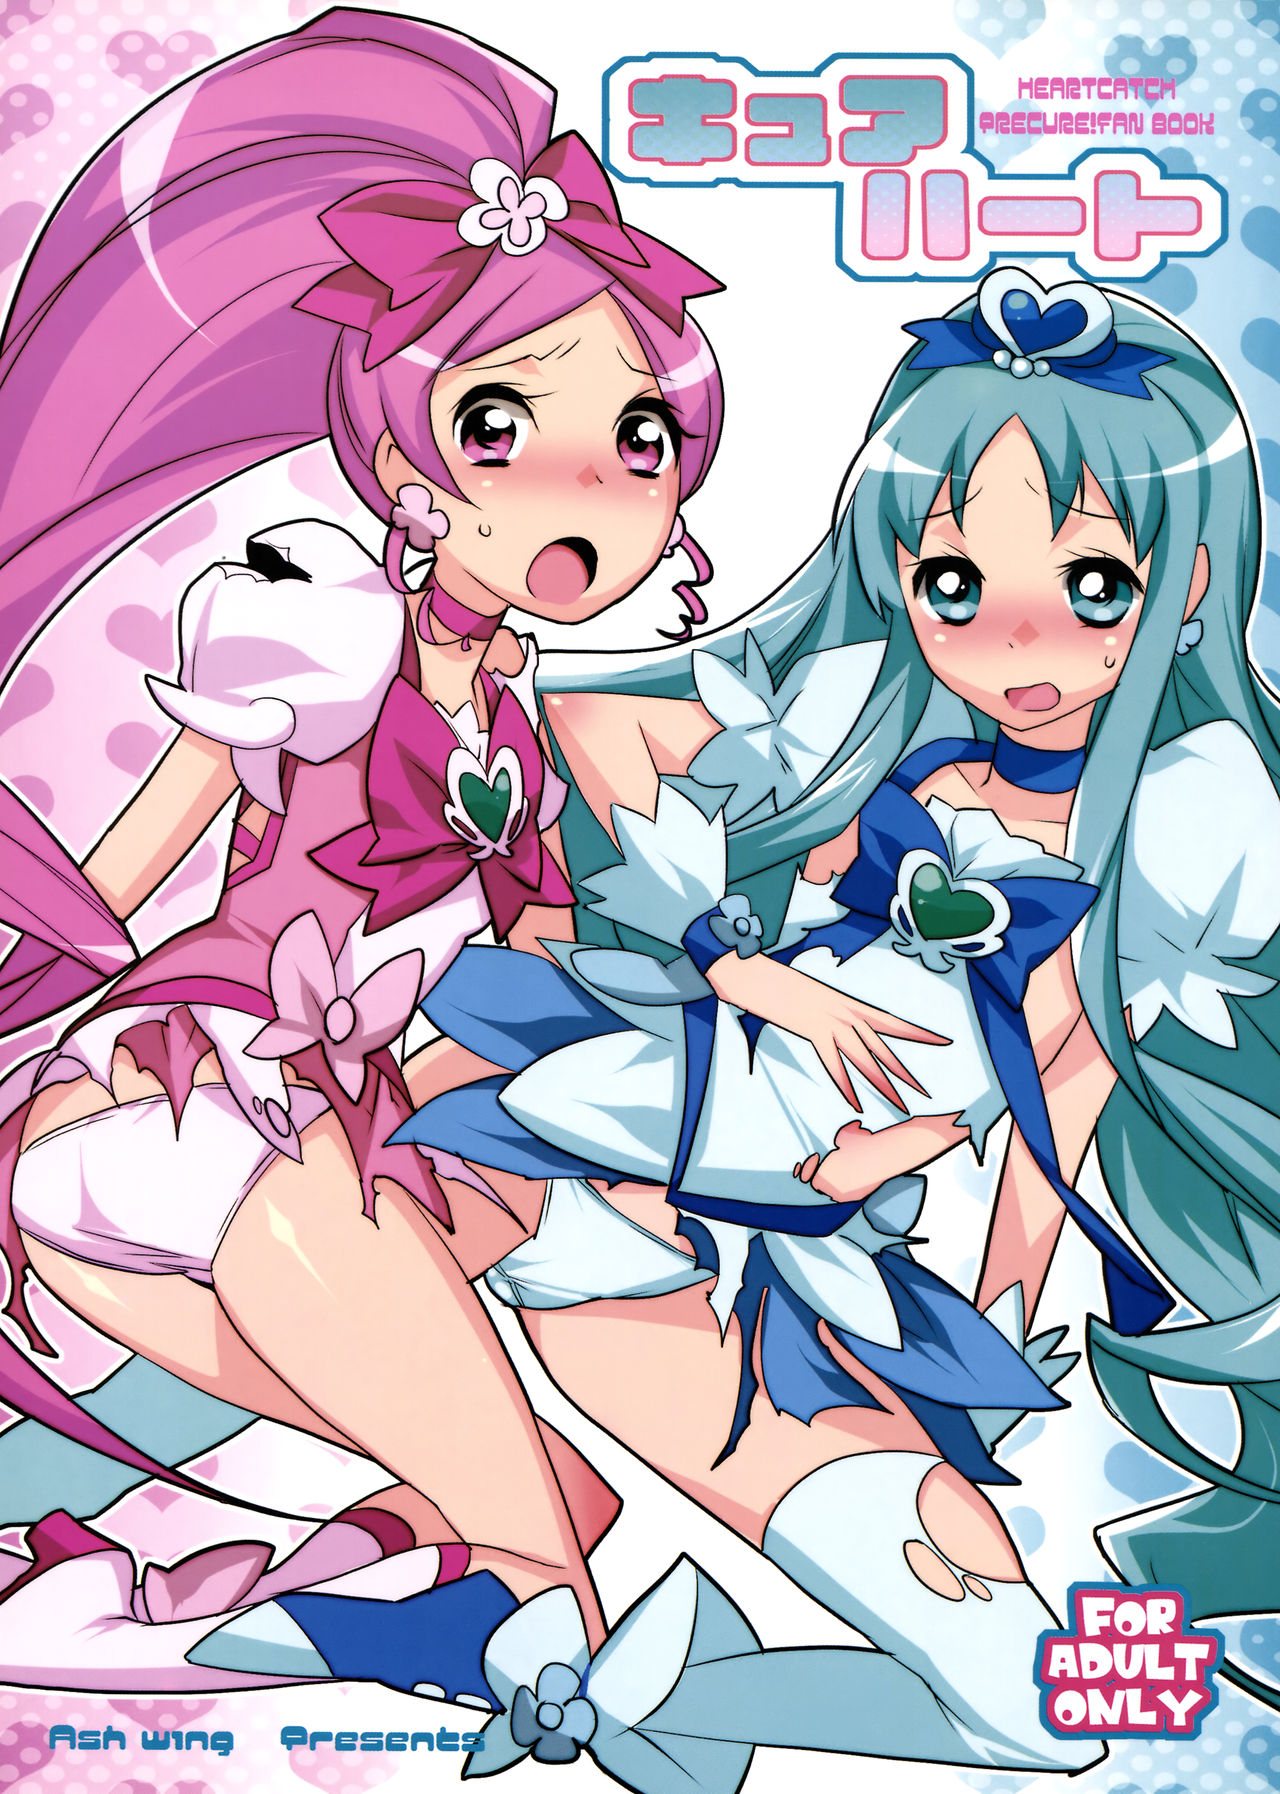 (COMIC1☆4) [Ash wing (Makuro)] Cure Heart (Heart Catch Precure!) (COMIC1☆4) (同人誌) [Ash wing (まくろ)] キュアハート (ハートキャッチプリキュア！)